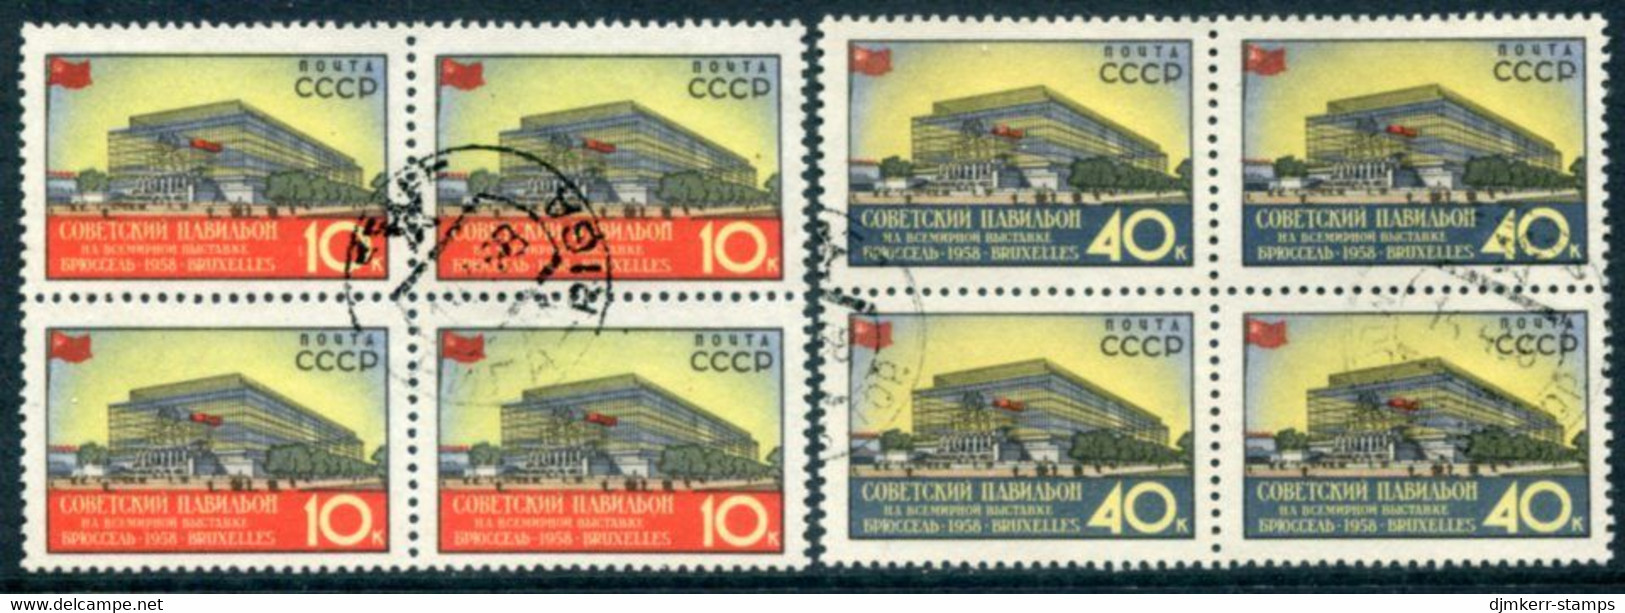 SOVIET UNION 1958 World Exhibition Perforated Blocks Of 4 Used .  Michel 2068-69 A - Used Stamps